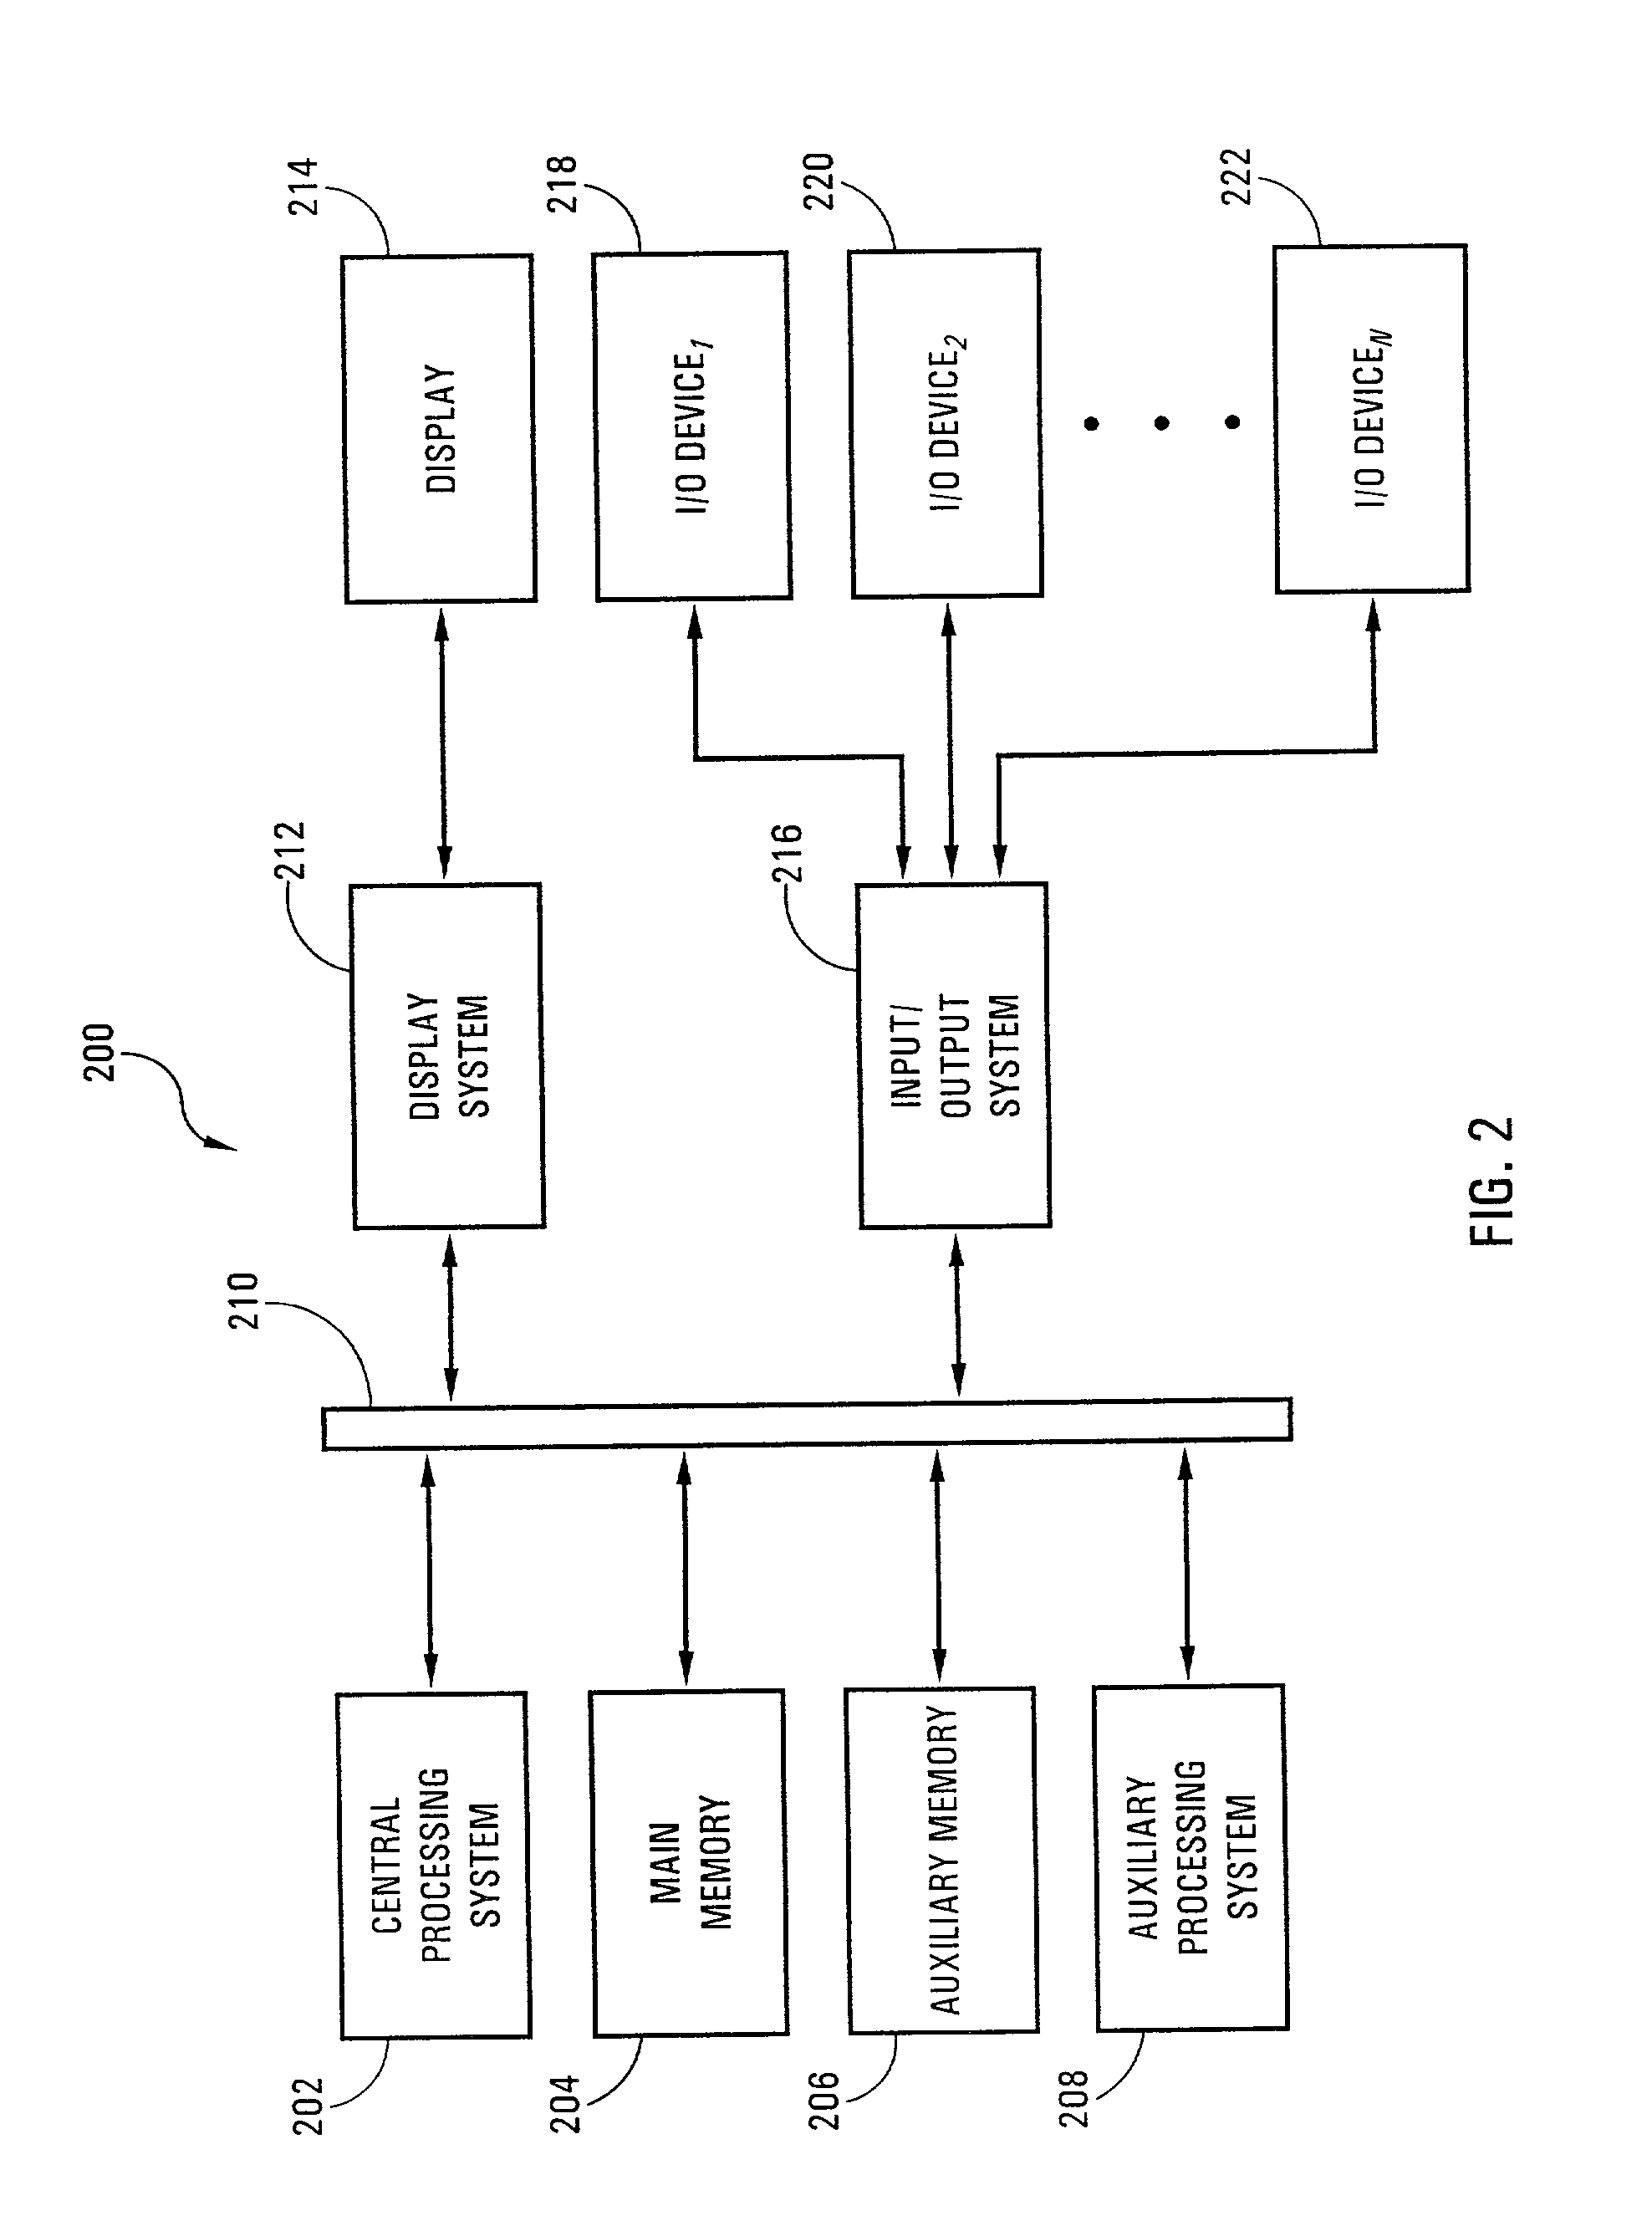 Customizable remote order entry system and method